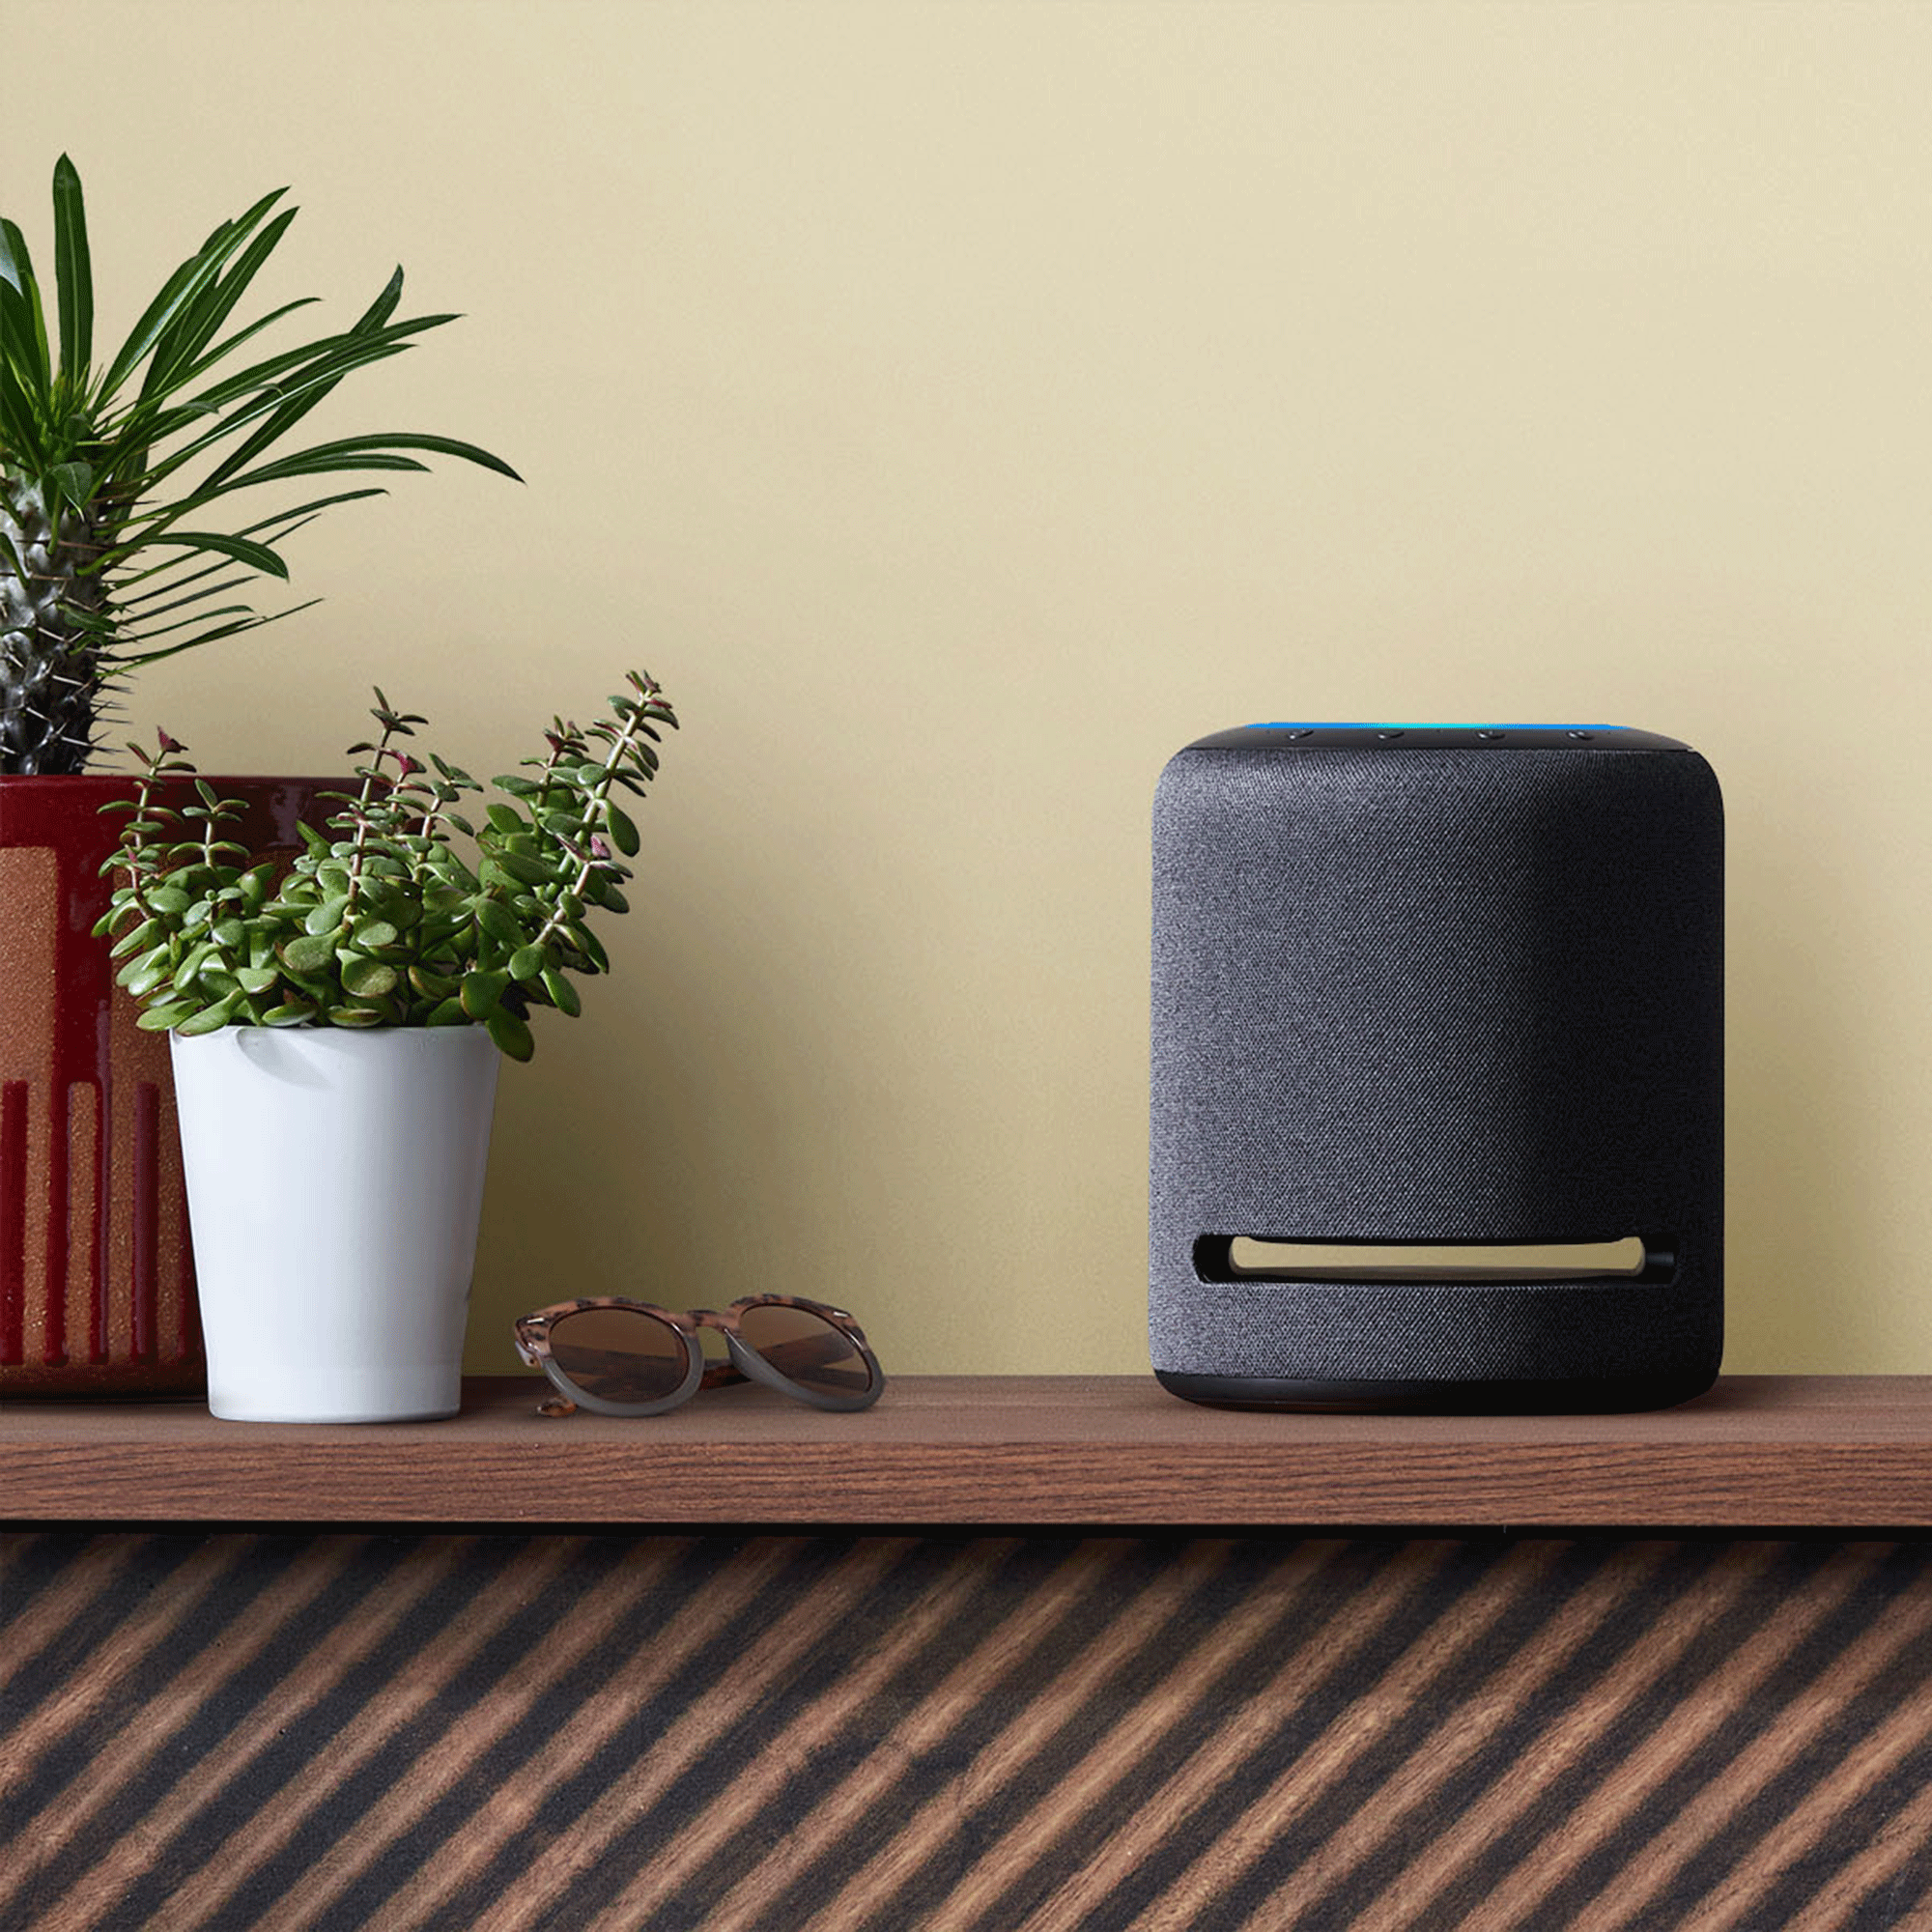 OVO Energy's new Alexa voice command can tell you when it's a greener time to use energy at home